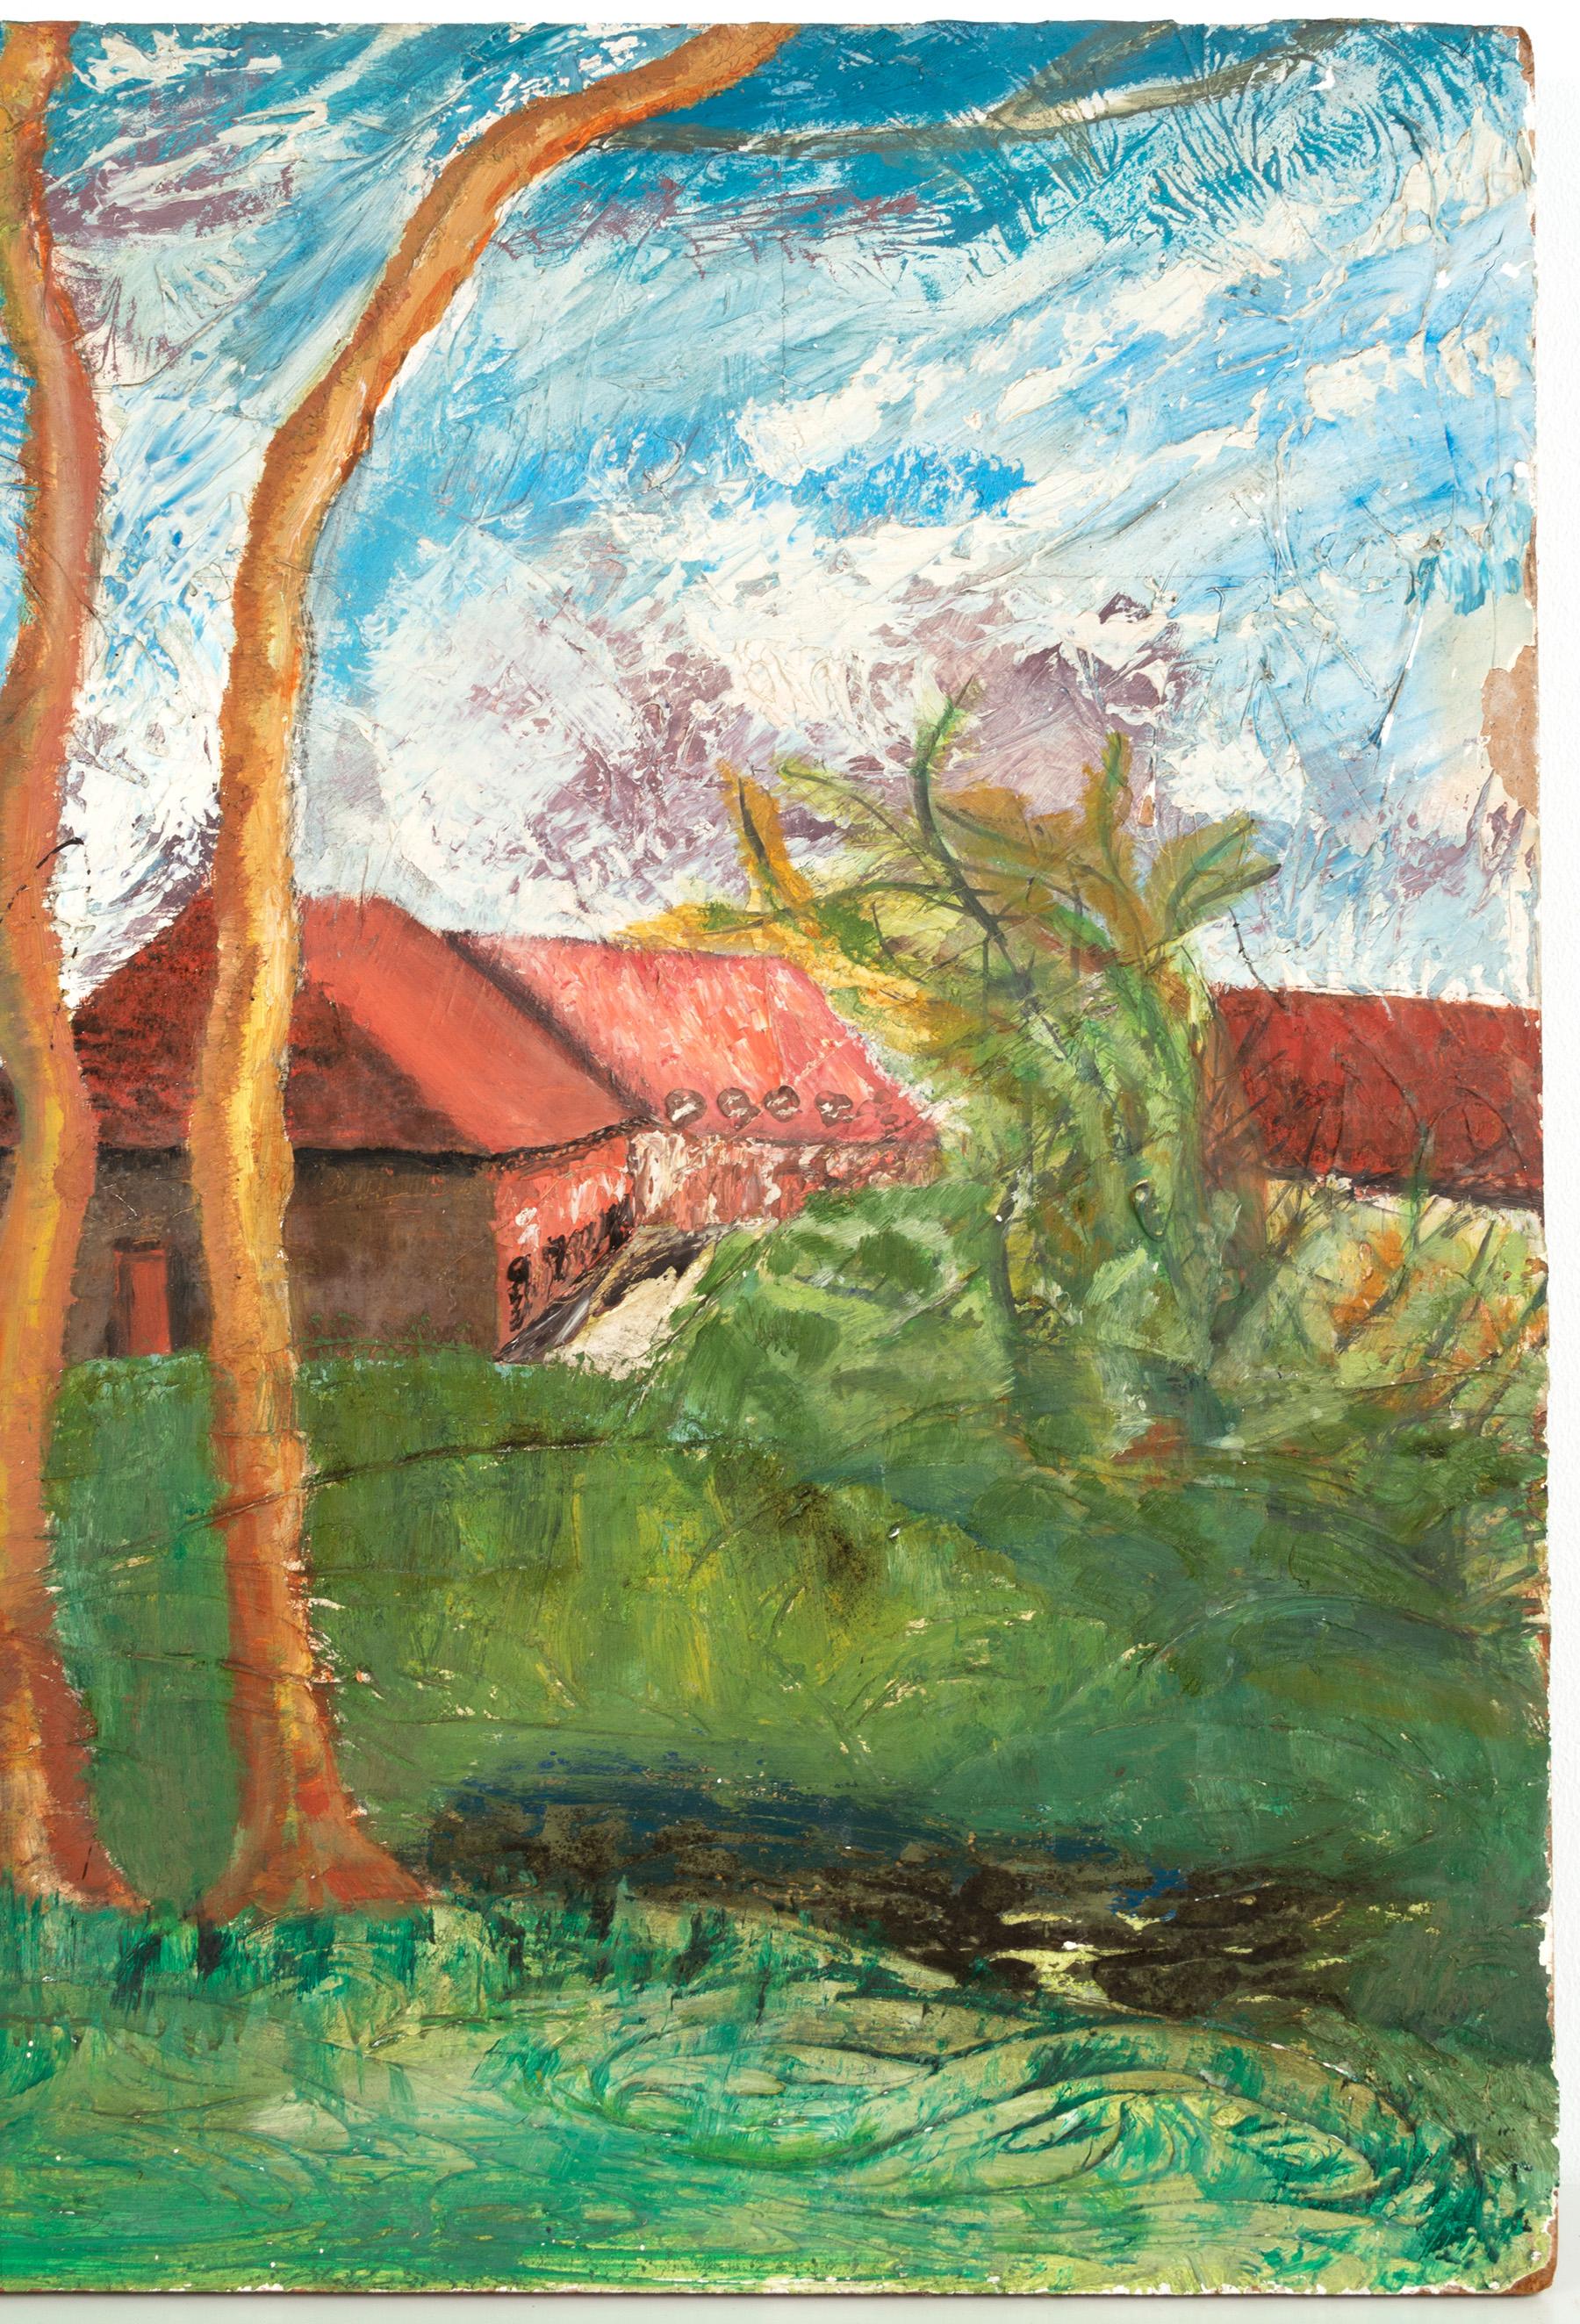 A Swedish mid-20th century Post-Impressionist oil on canvas depicting a countryside scene. Influenced by the works of Van Gogh . 

C.1950 Unsigned.

Oil on board, unframed.

Excellent color, tone and texture.

Provenance: Private London